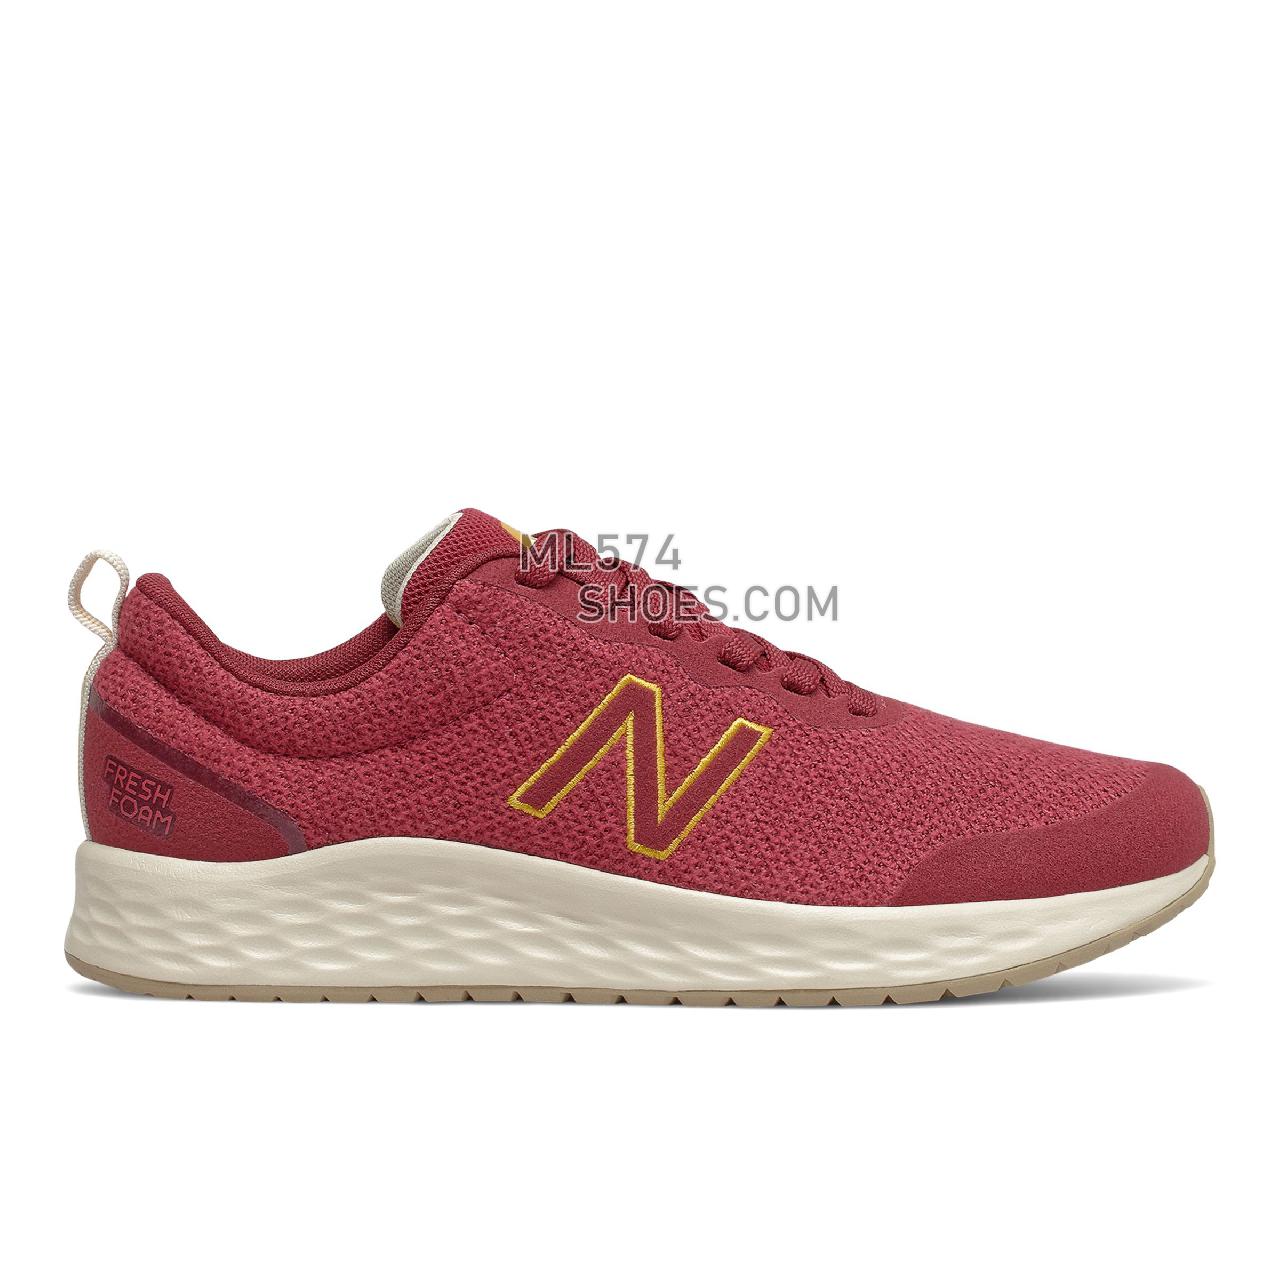 New Balance Fresh Foam Arishi v3 - Women's Neutral Running - Deep Earth Red with Earth Red and Harvest Gold - WARISMR3